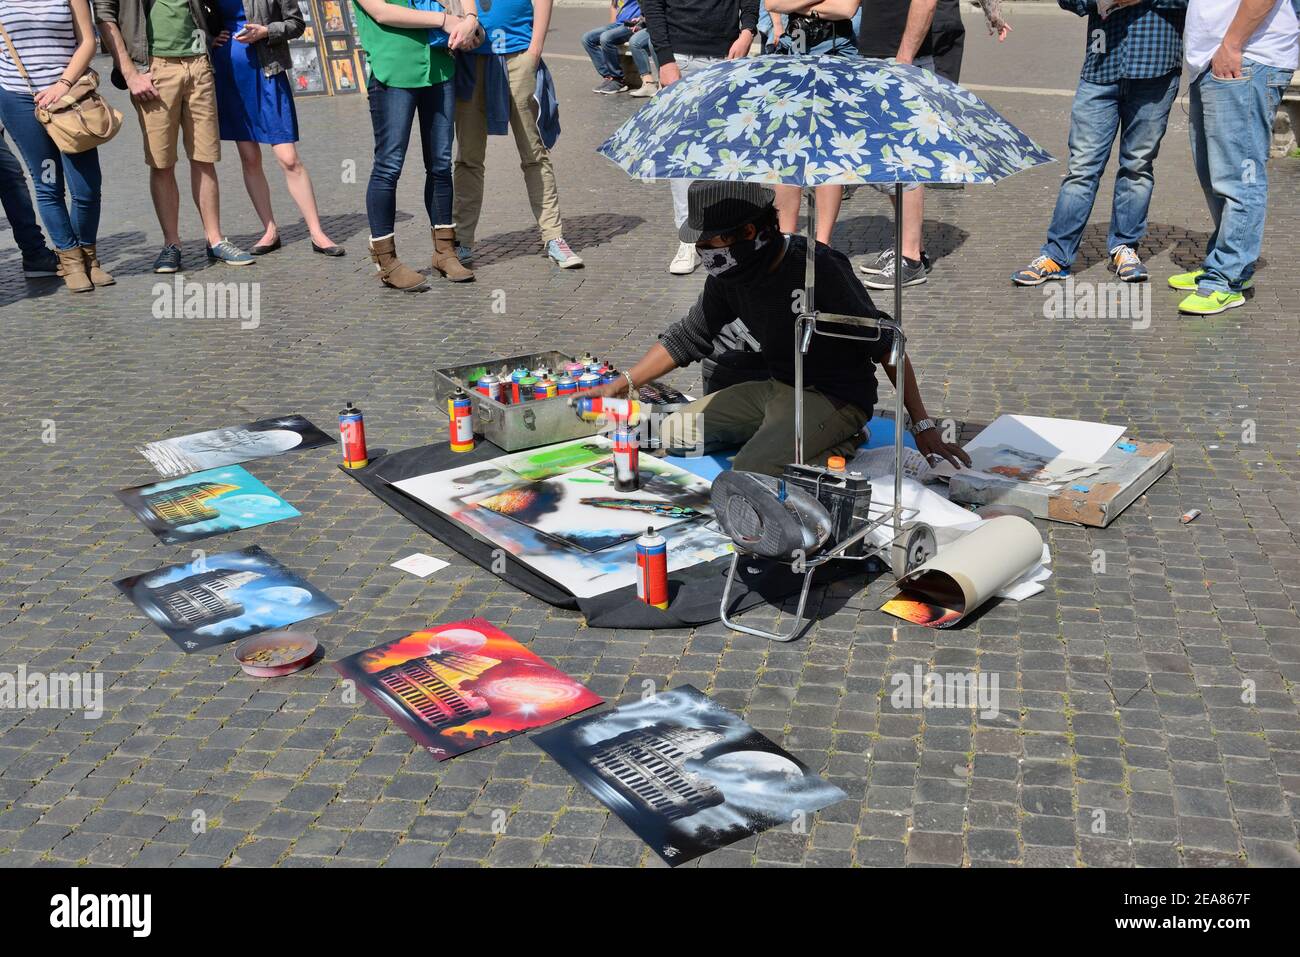 A young man under an umbrella painting colourful pictures using spray paint aerosol cans on a cobbled street with tourist looking on in Rome, Italy Stock Photo